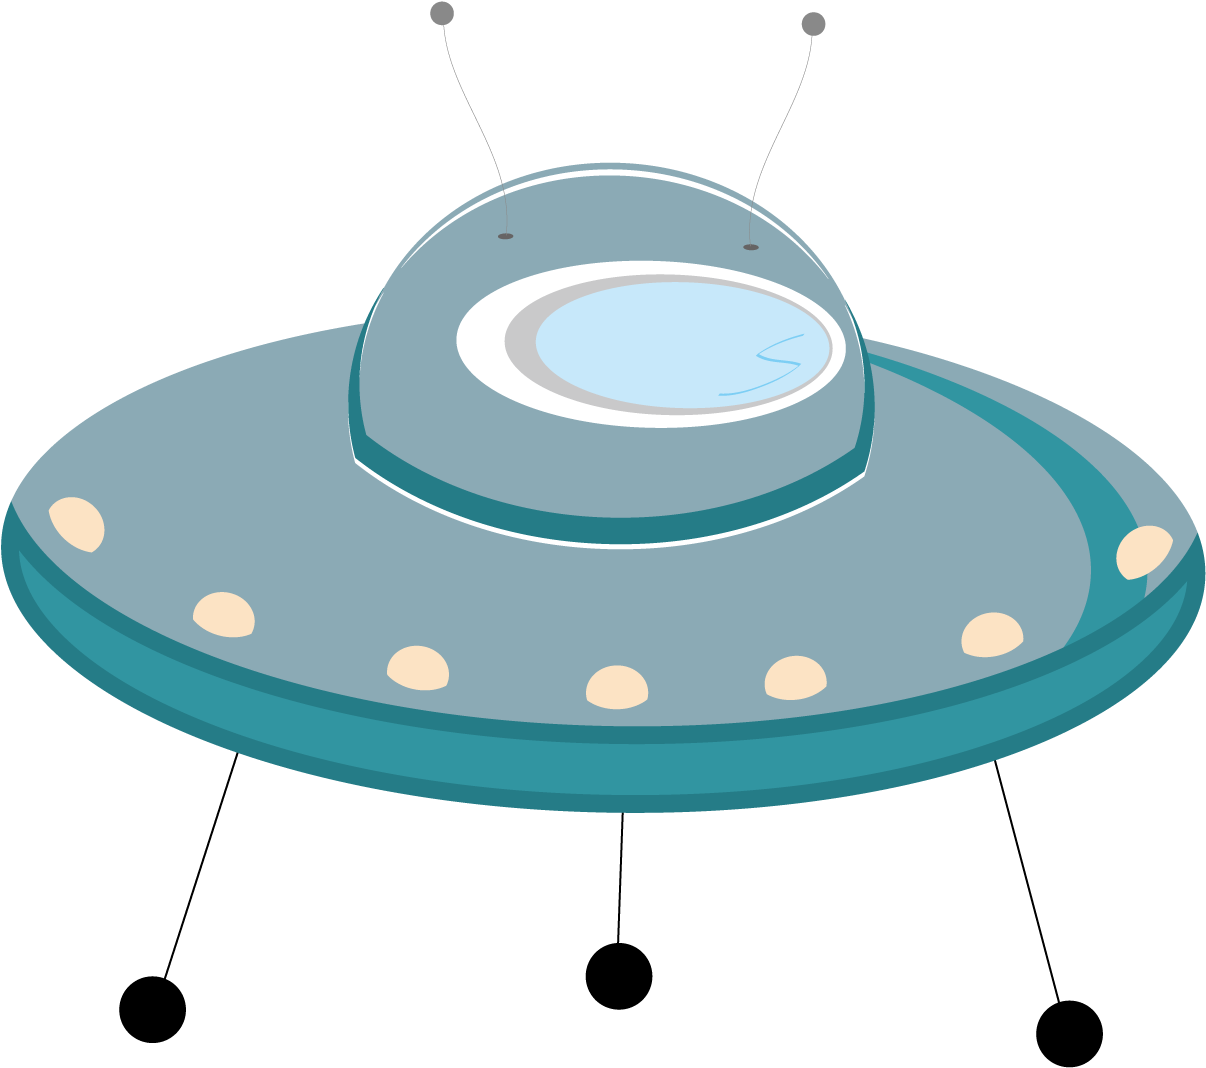 Flying Saucer Unidentified Flying Object Cartoon Clip - Ufo Vector ...